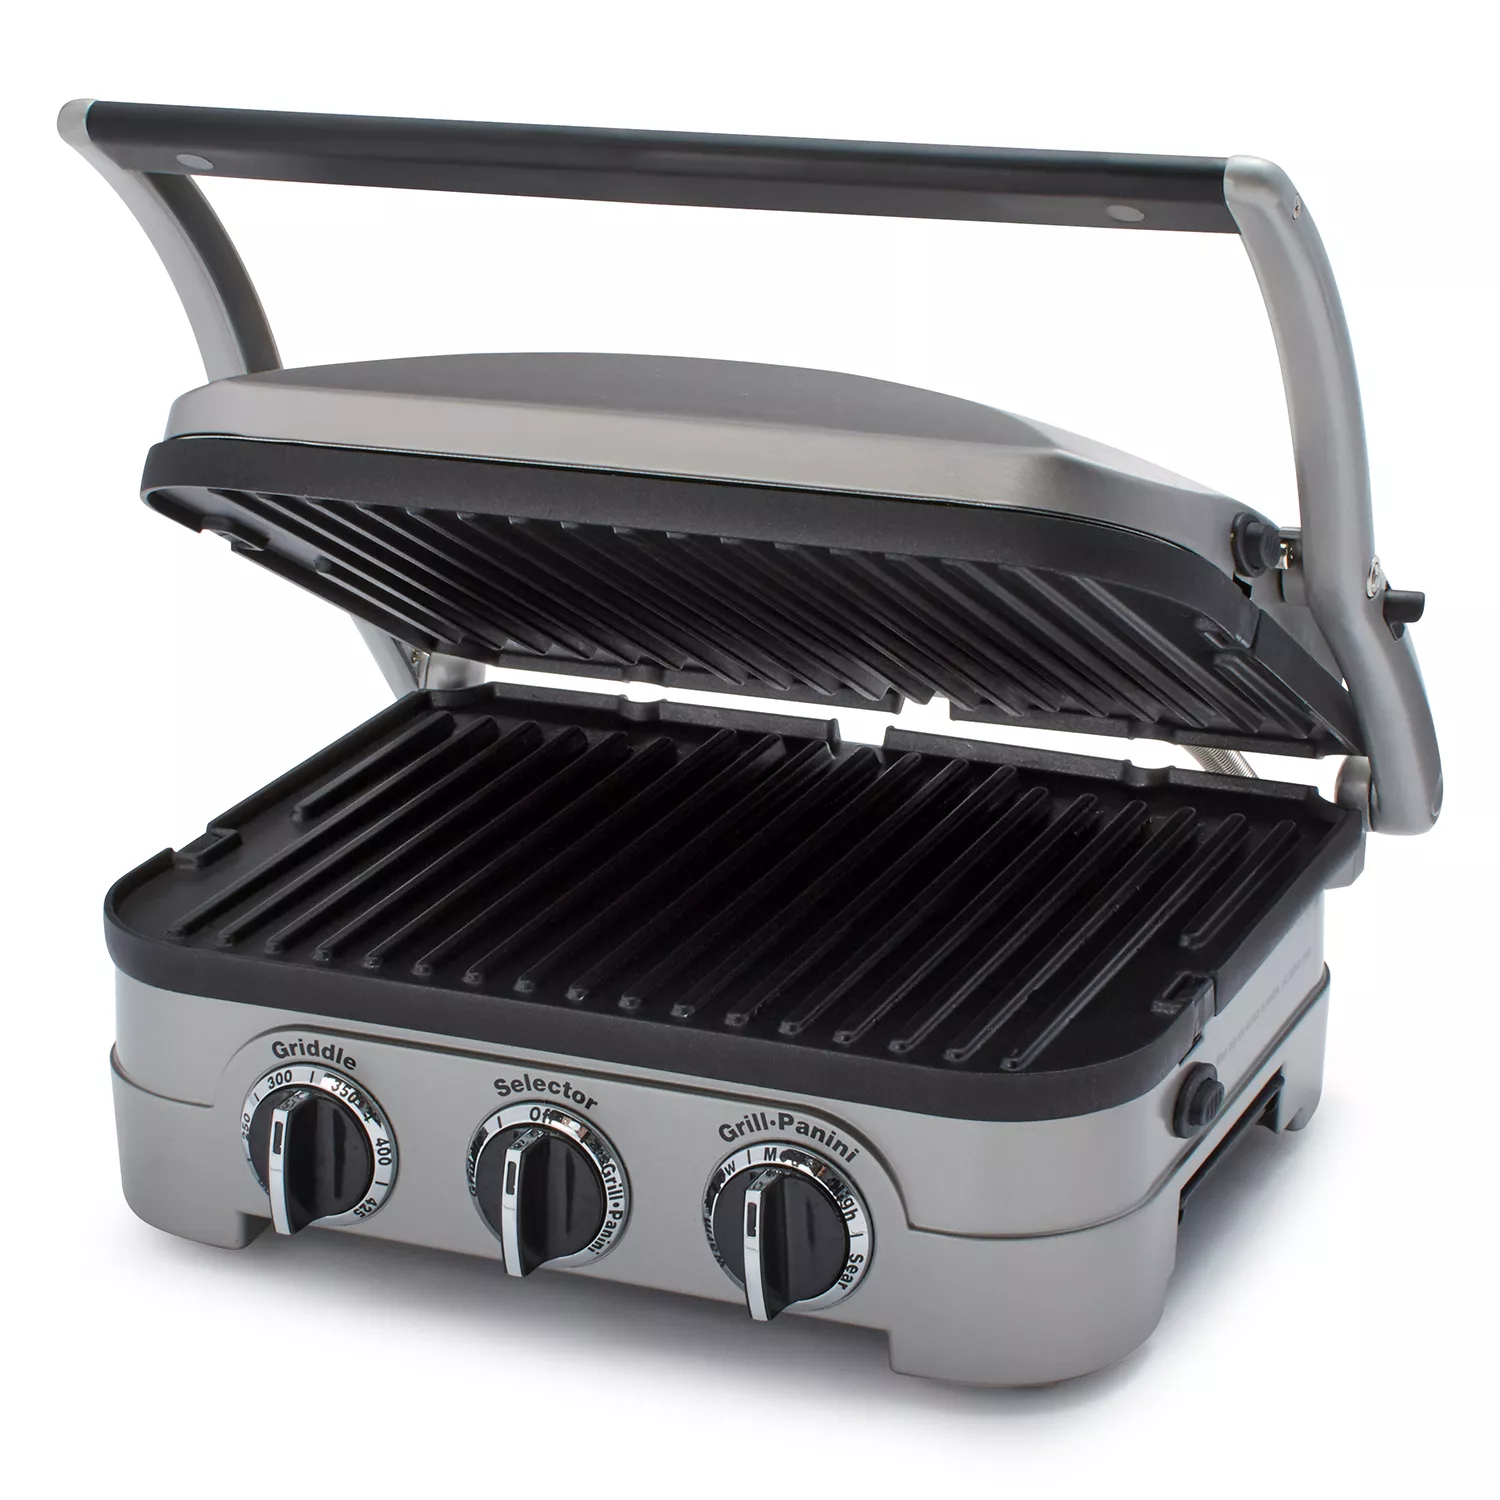 Cuisinart Griddler Review: The All-Purpose Appliance You Need